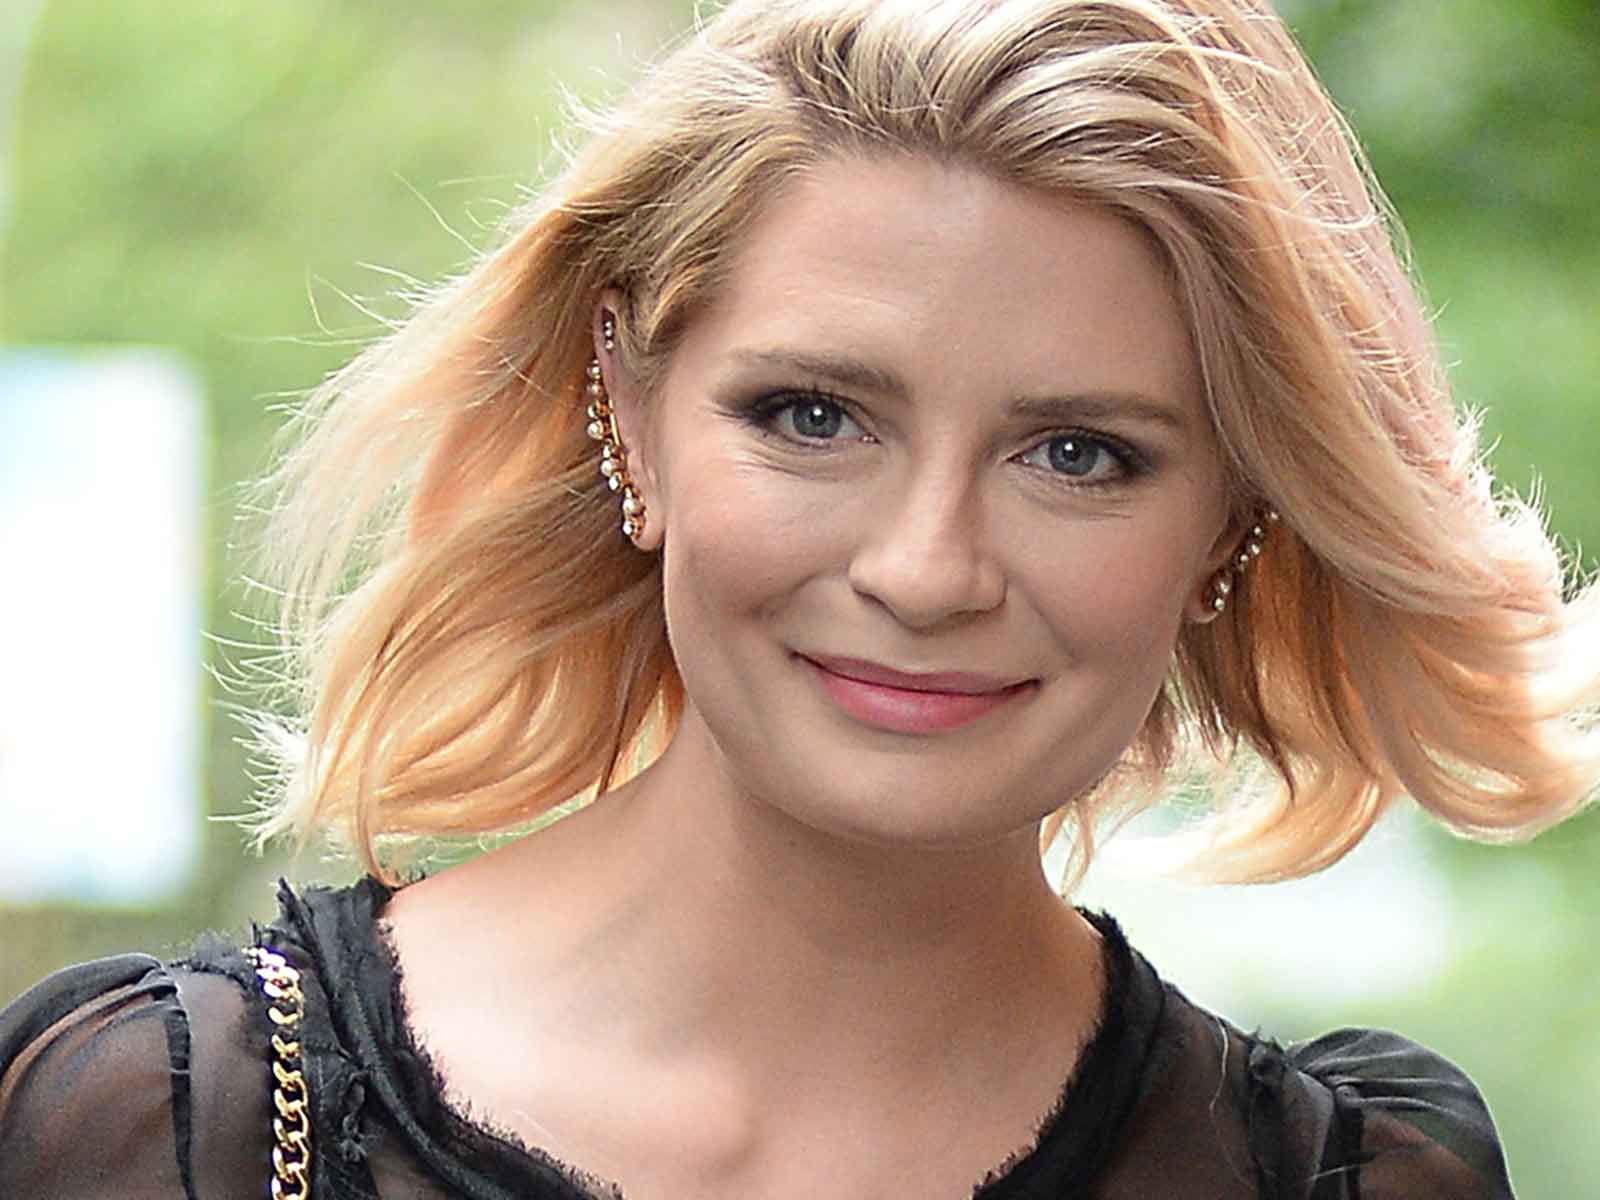 Mischa Barton Fights to Keep Mention of Past Drug Use Out of U-Haul ...